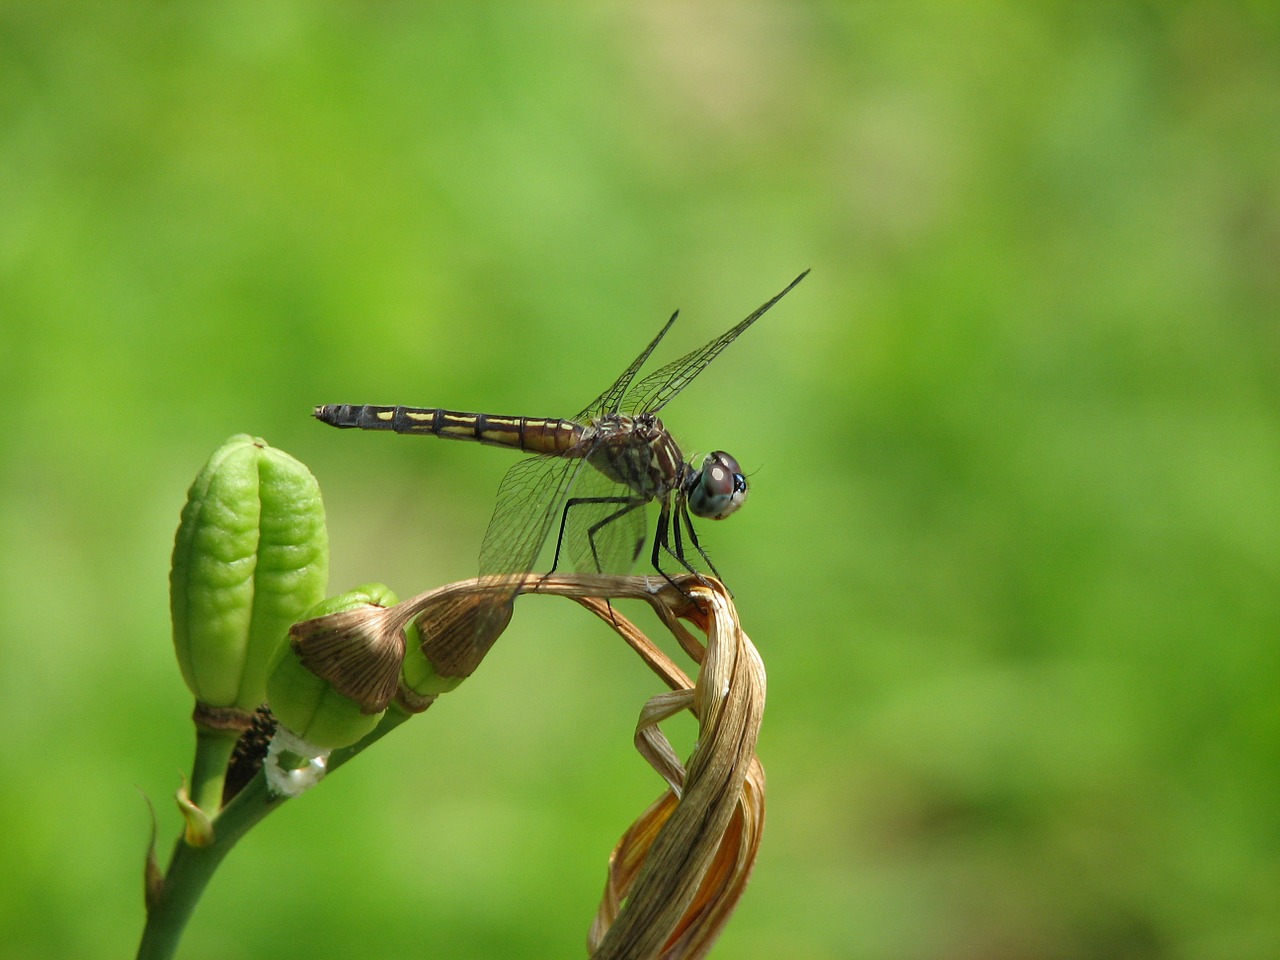 dragon-fly perched bug free photo